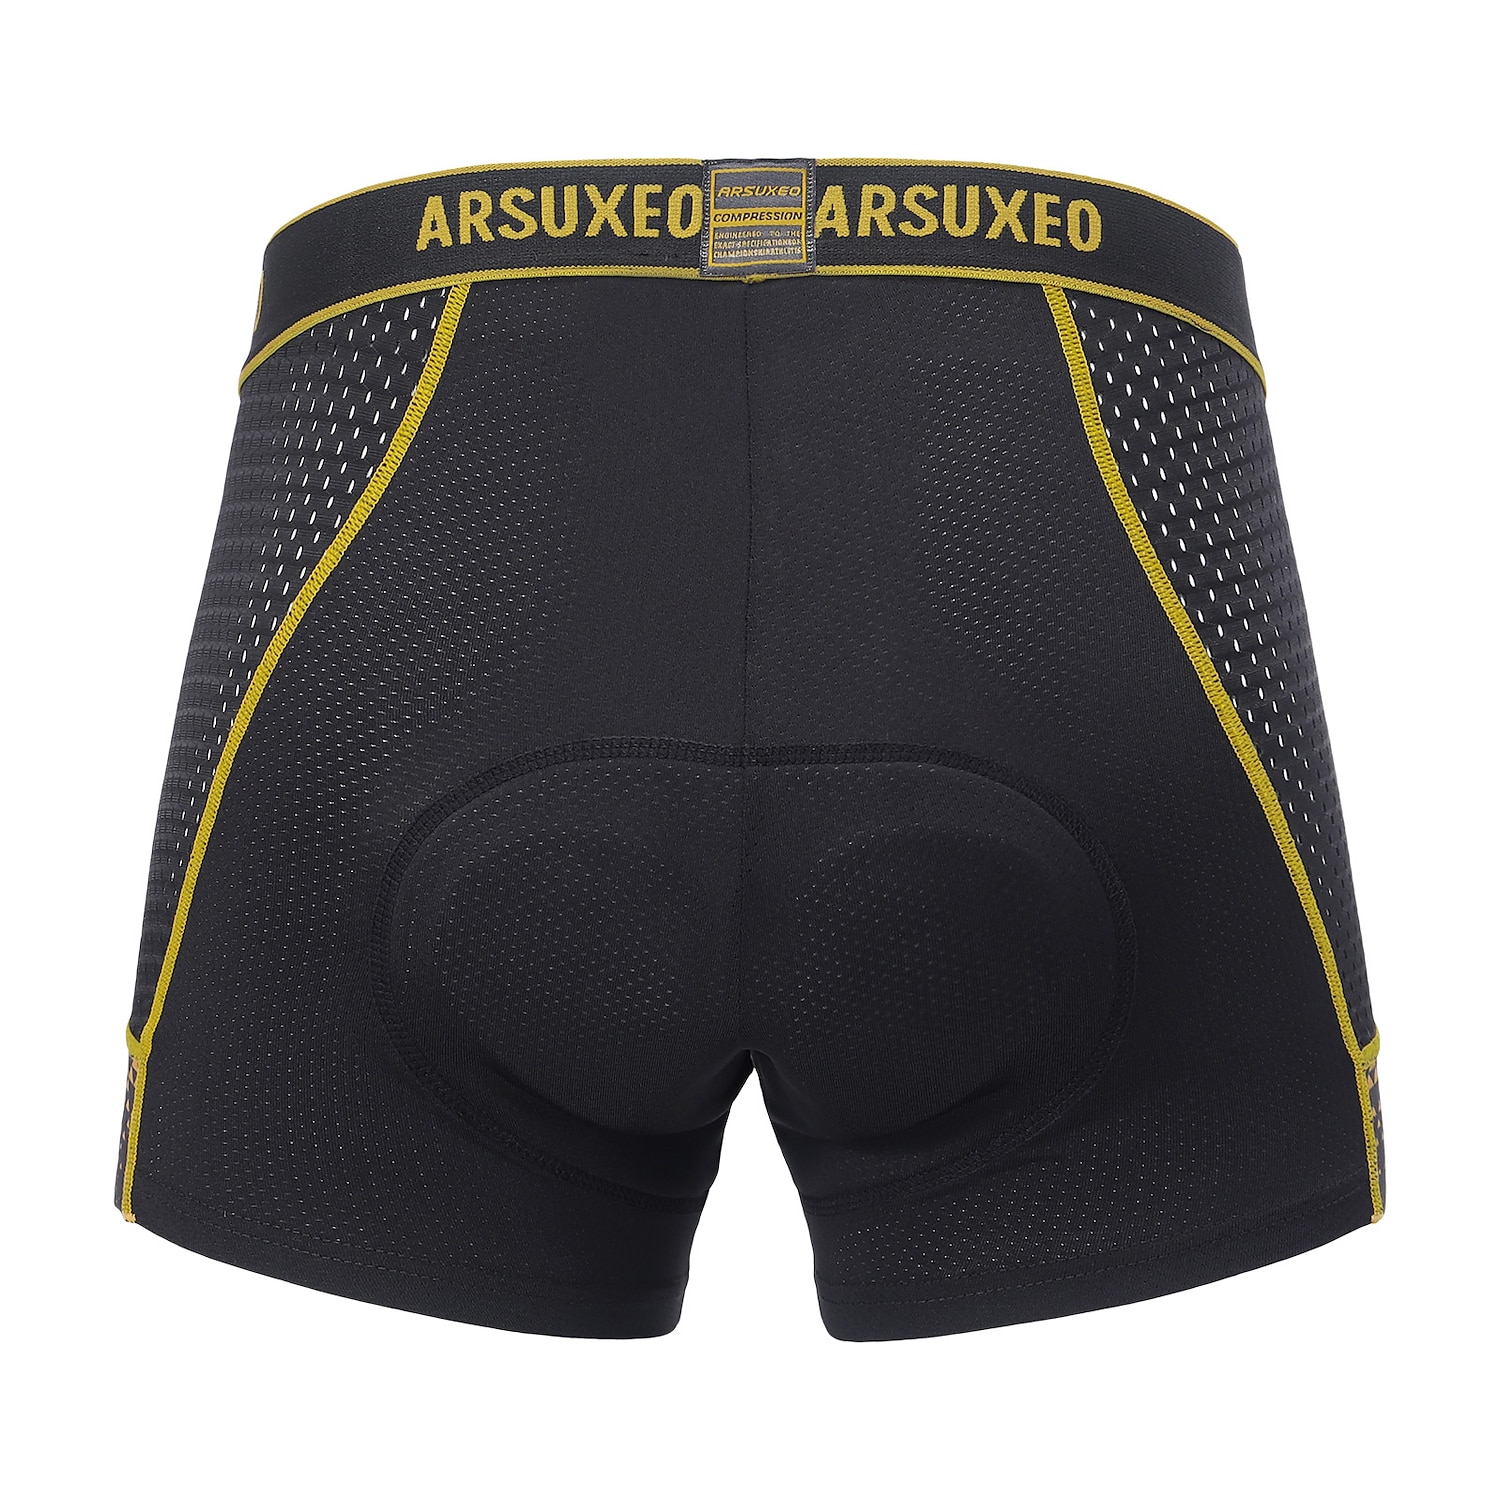 How to Size and Fit Padded Bike Underwear •